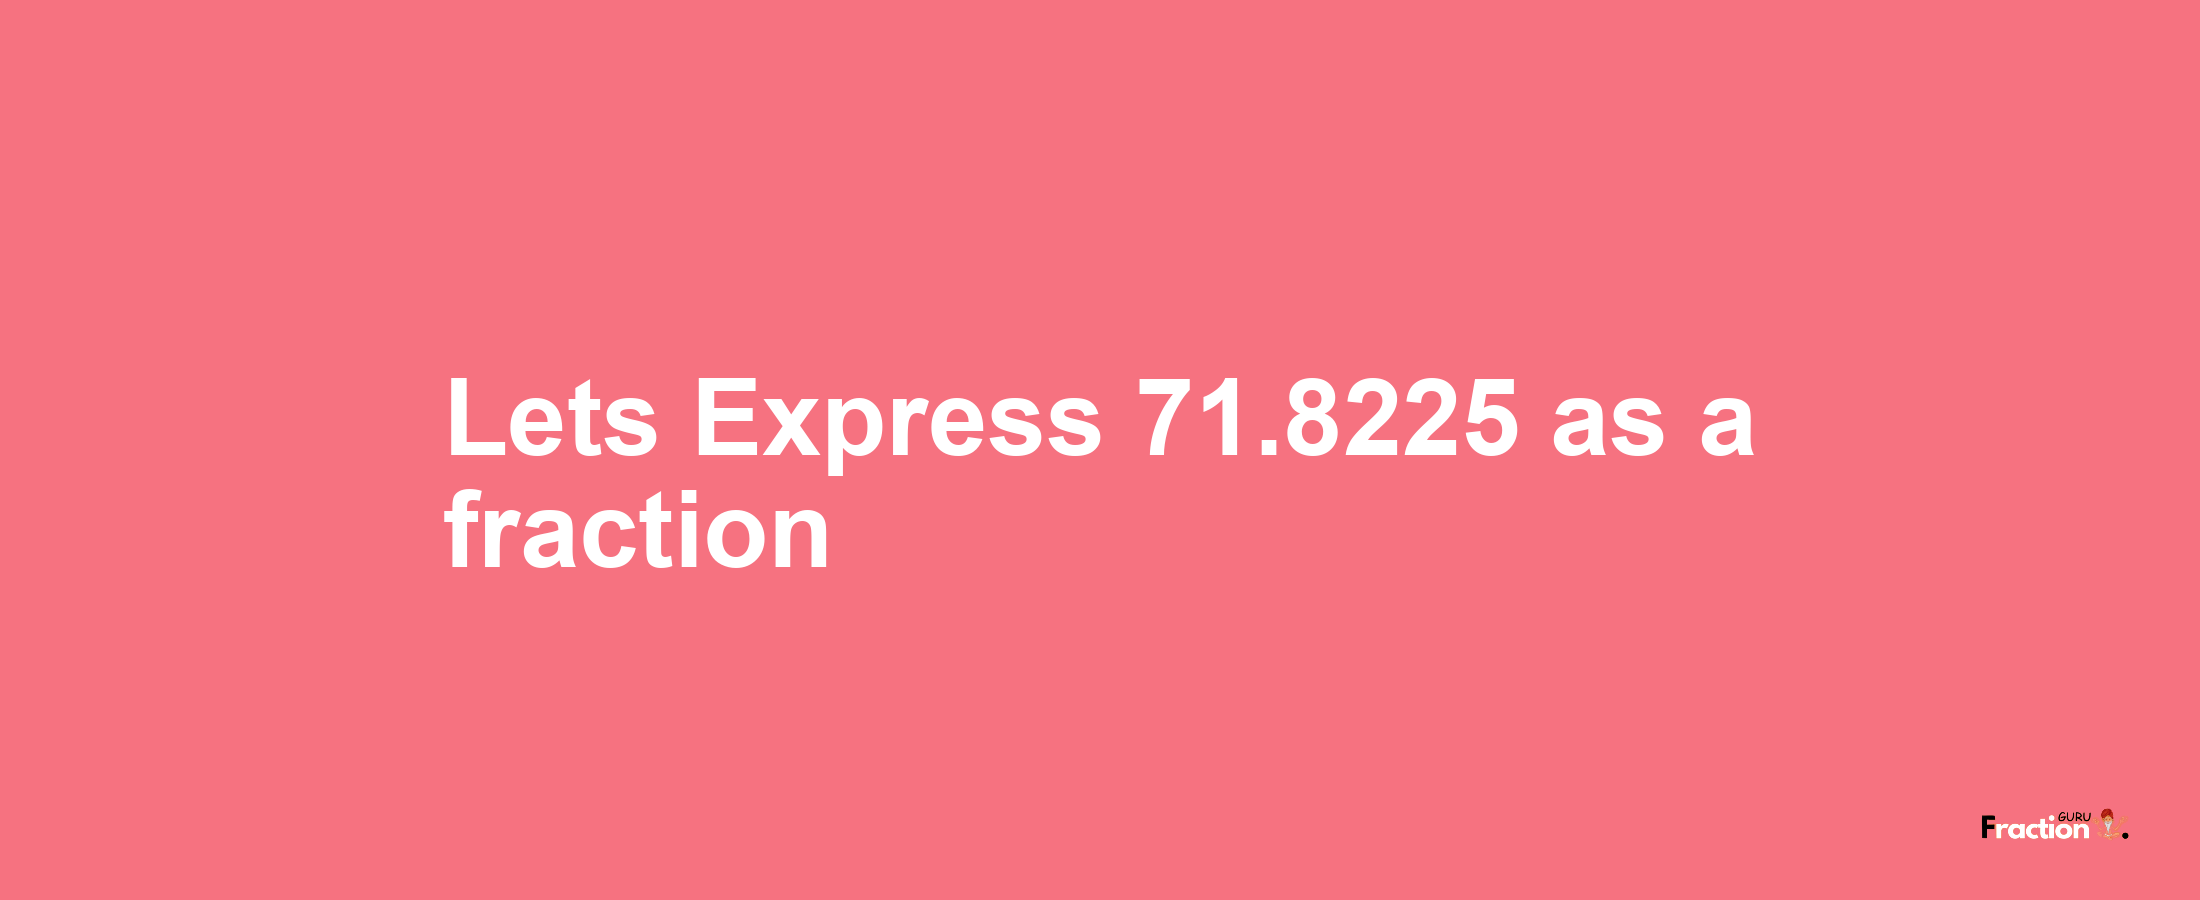 Lets Express 71.8225 as afraction